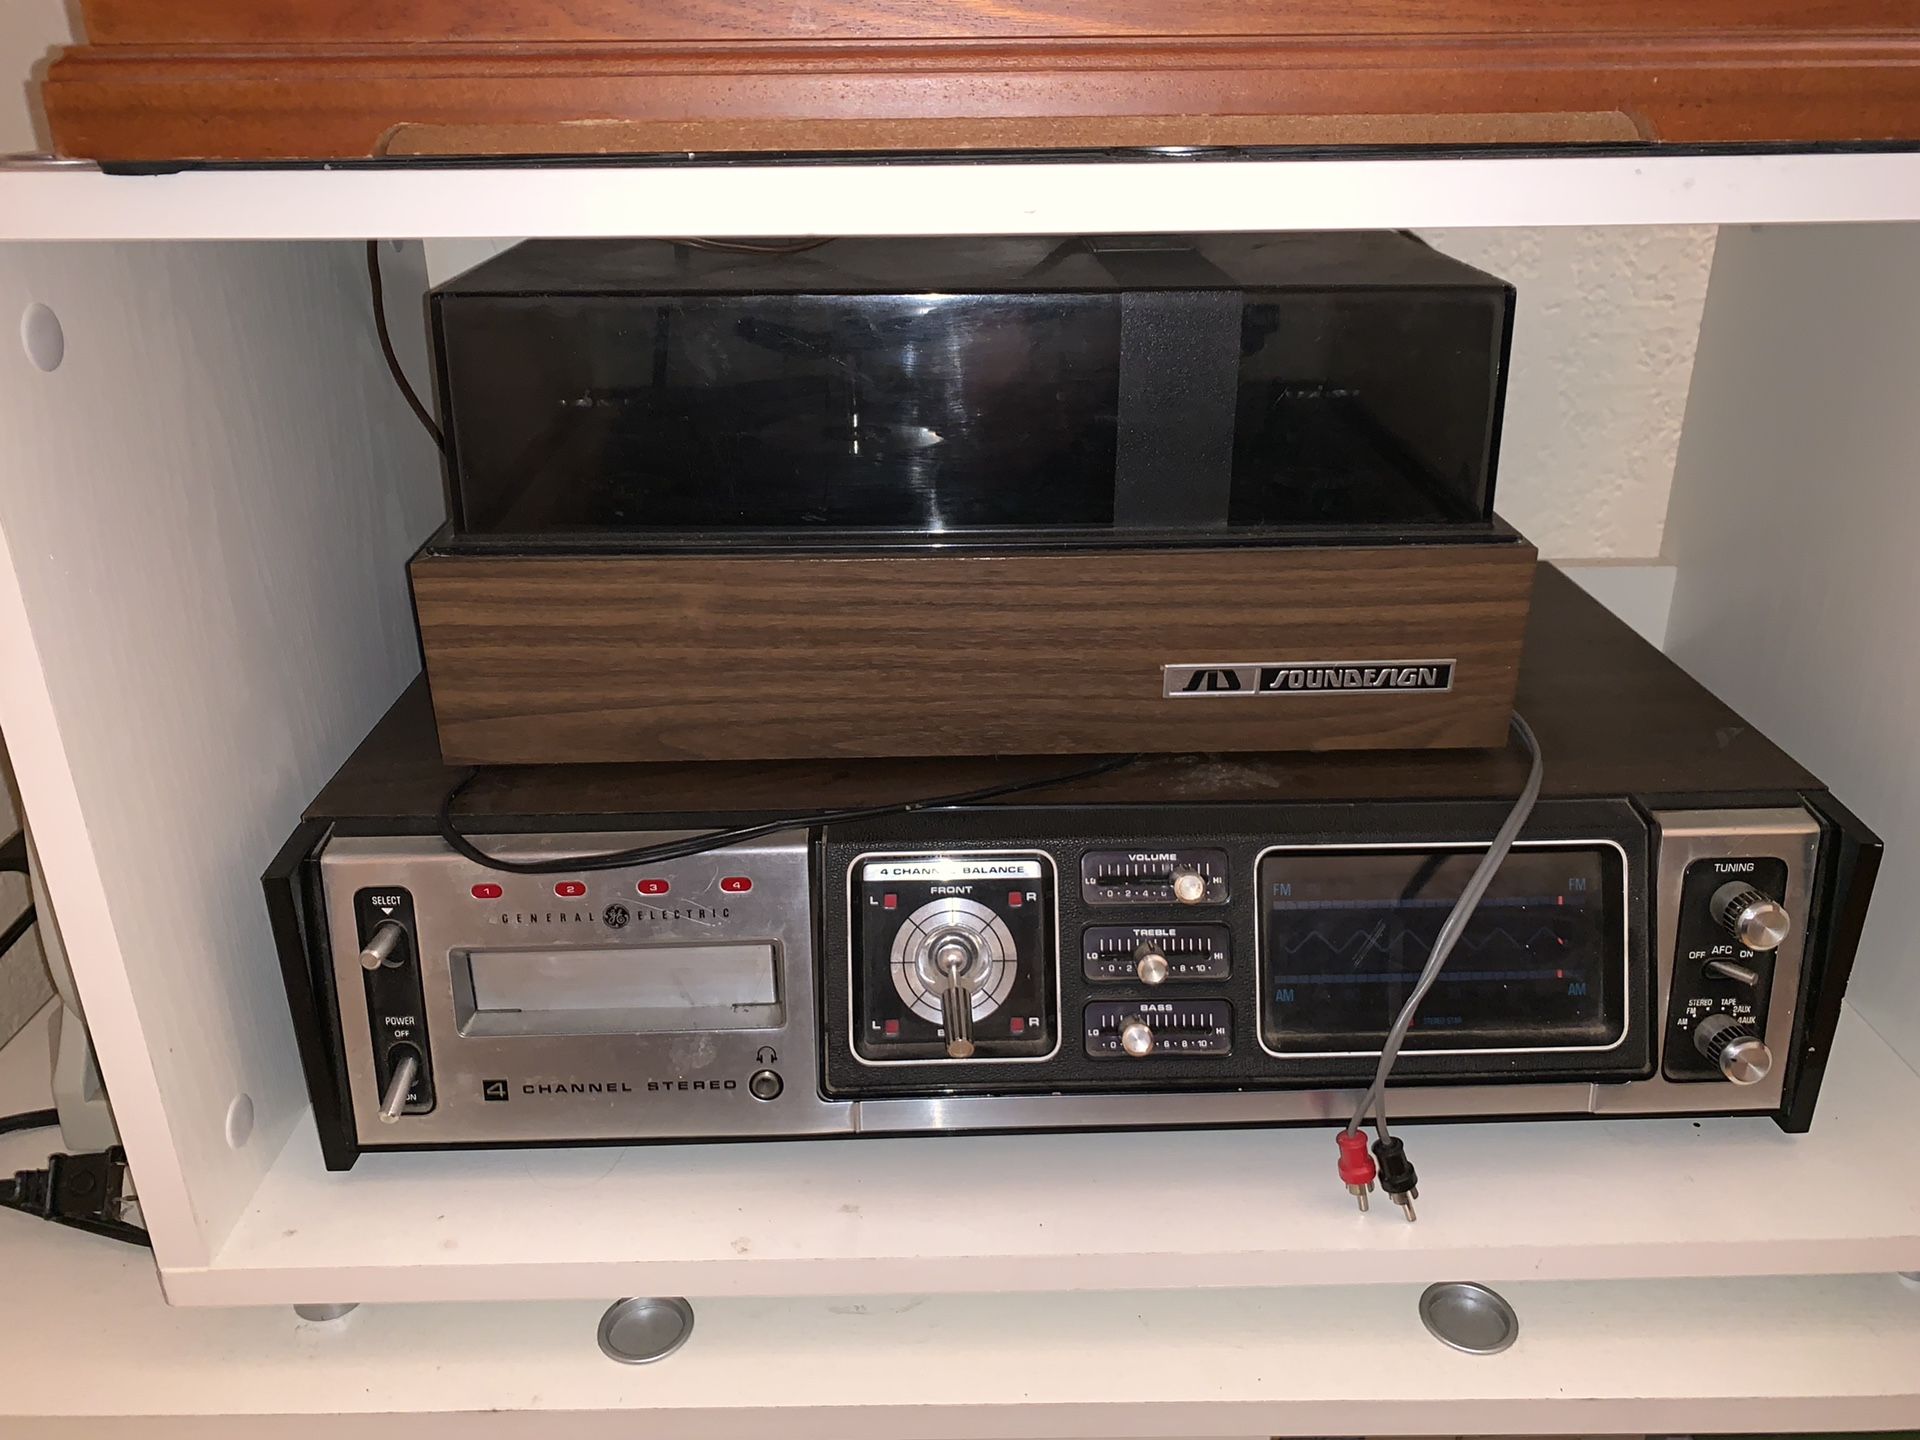 1973 General Electric Quadraphonic Stereo System (needs cables)